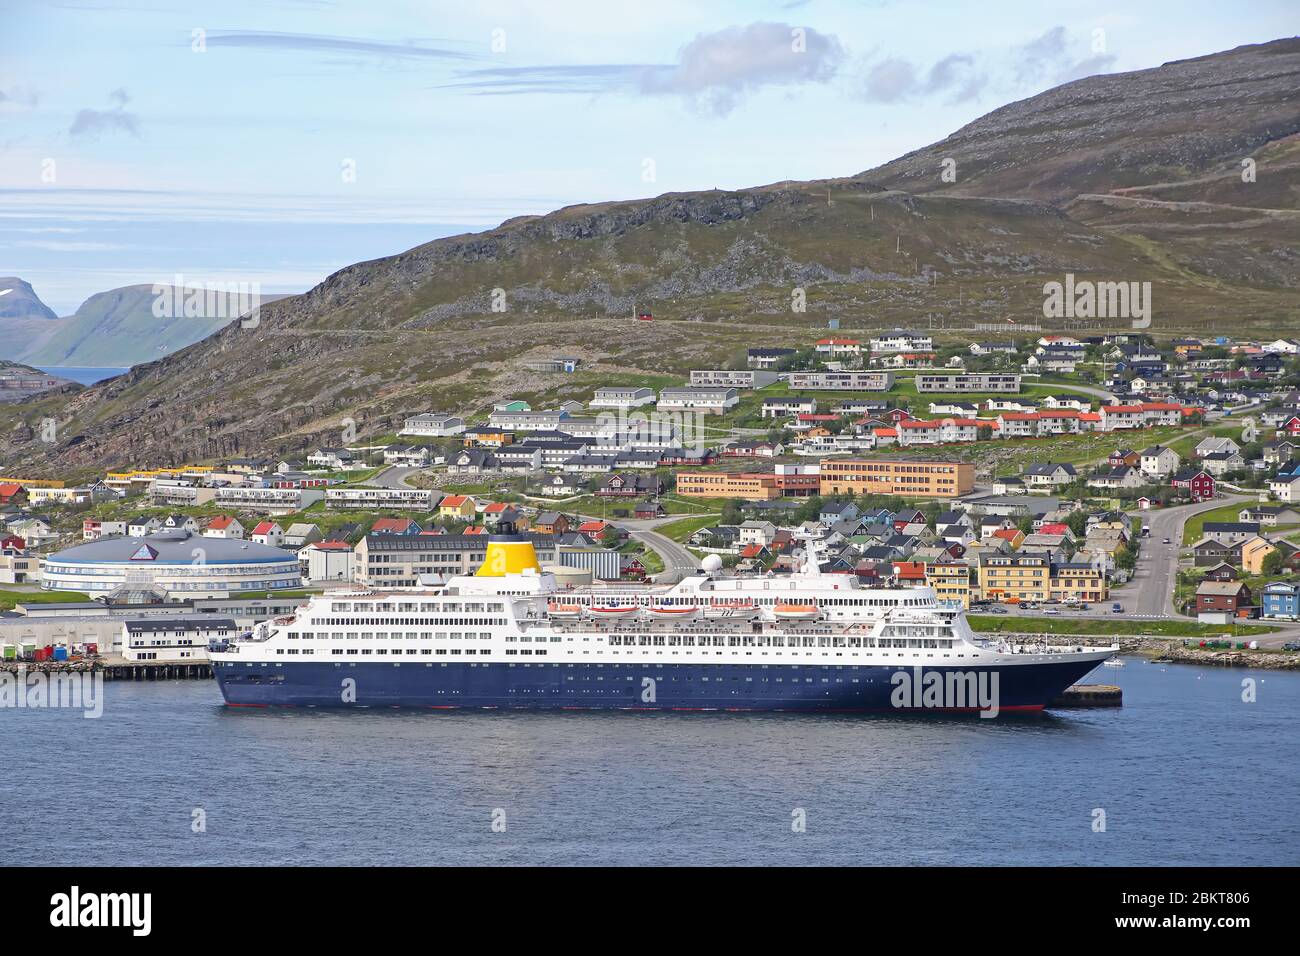 Cruise ship docked in the port of Hammerfest, the northernmost town in the world with more than 10,000 inhabitants, Troms og Finnmark county, Norway. Stock Photo